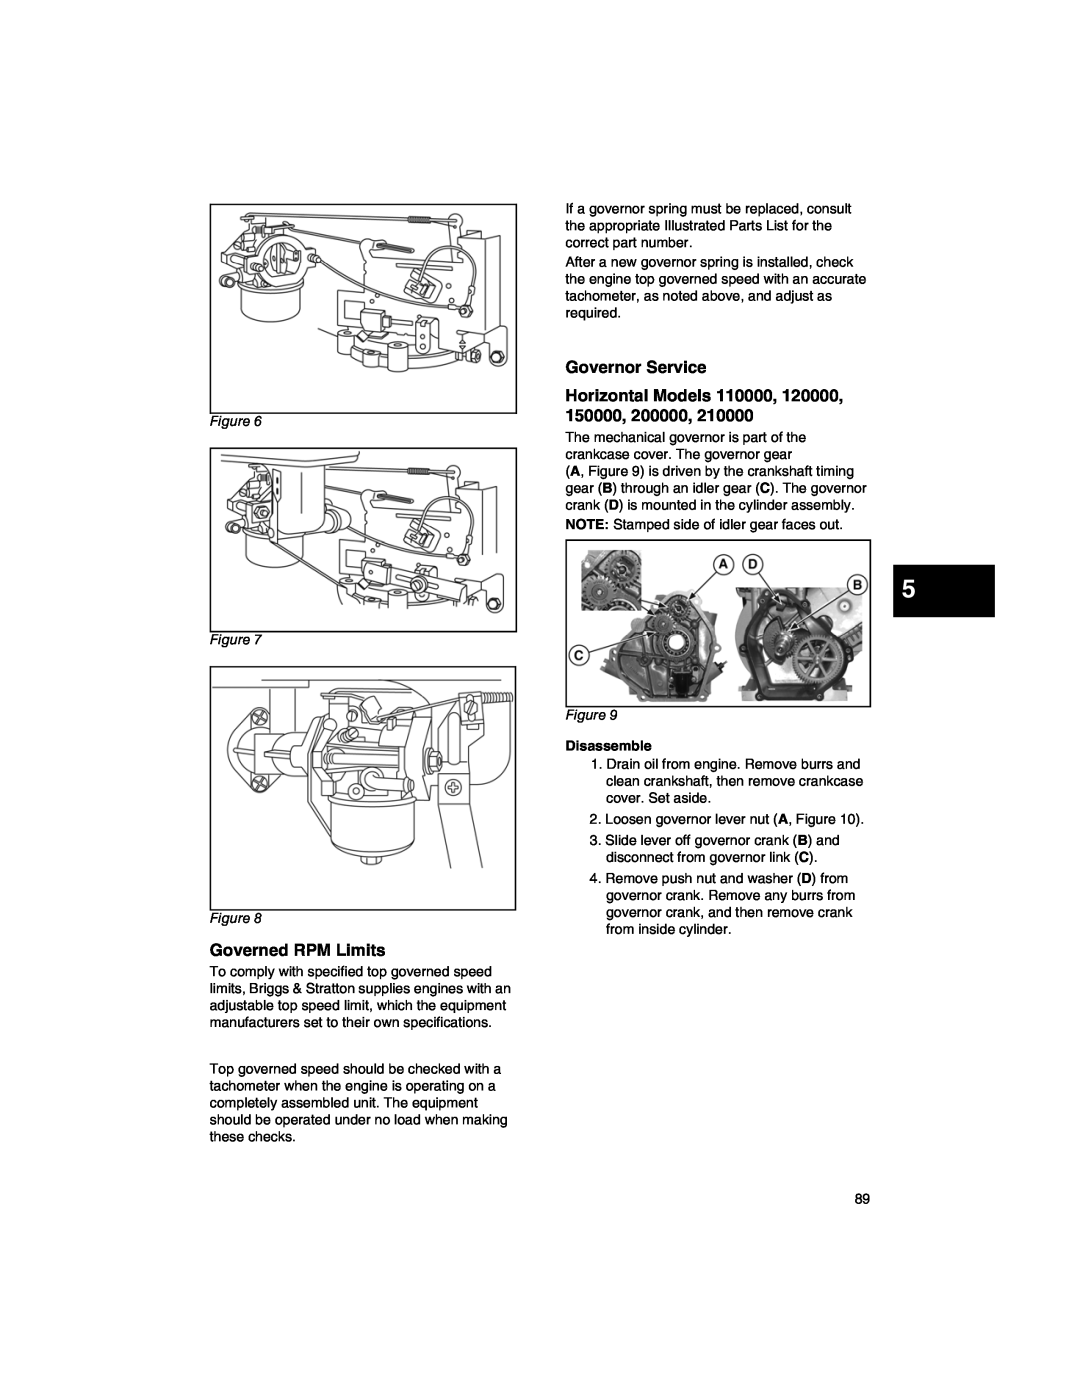 Briggs & Stratton CE8069, 271172 Governed RPM Limits, Governor Service, Horizontal Models 110000, 120000, 150000, 200000 